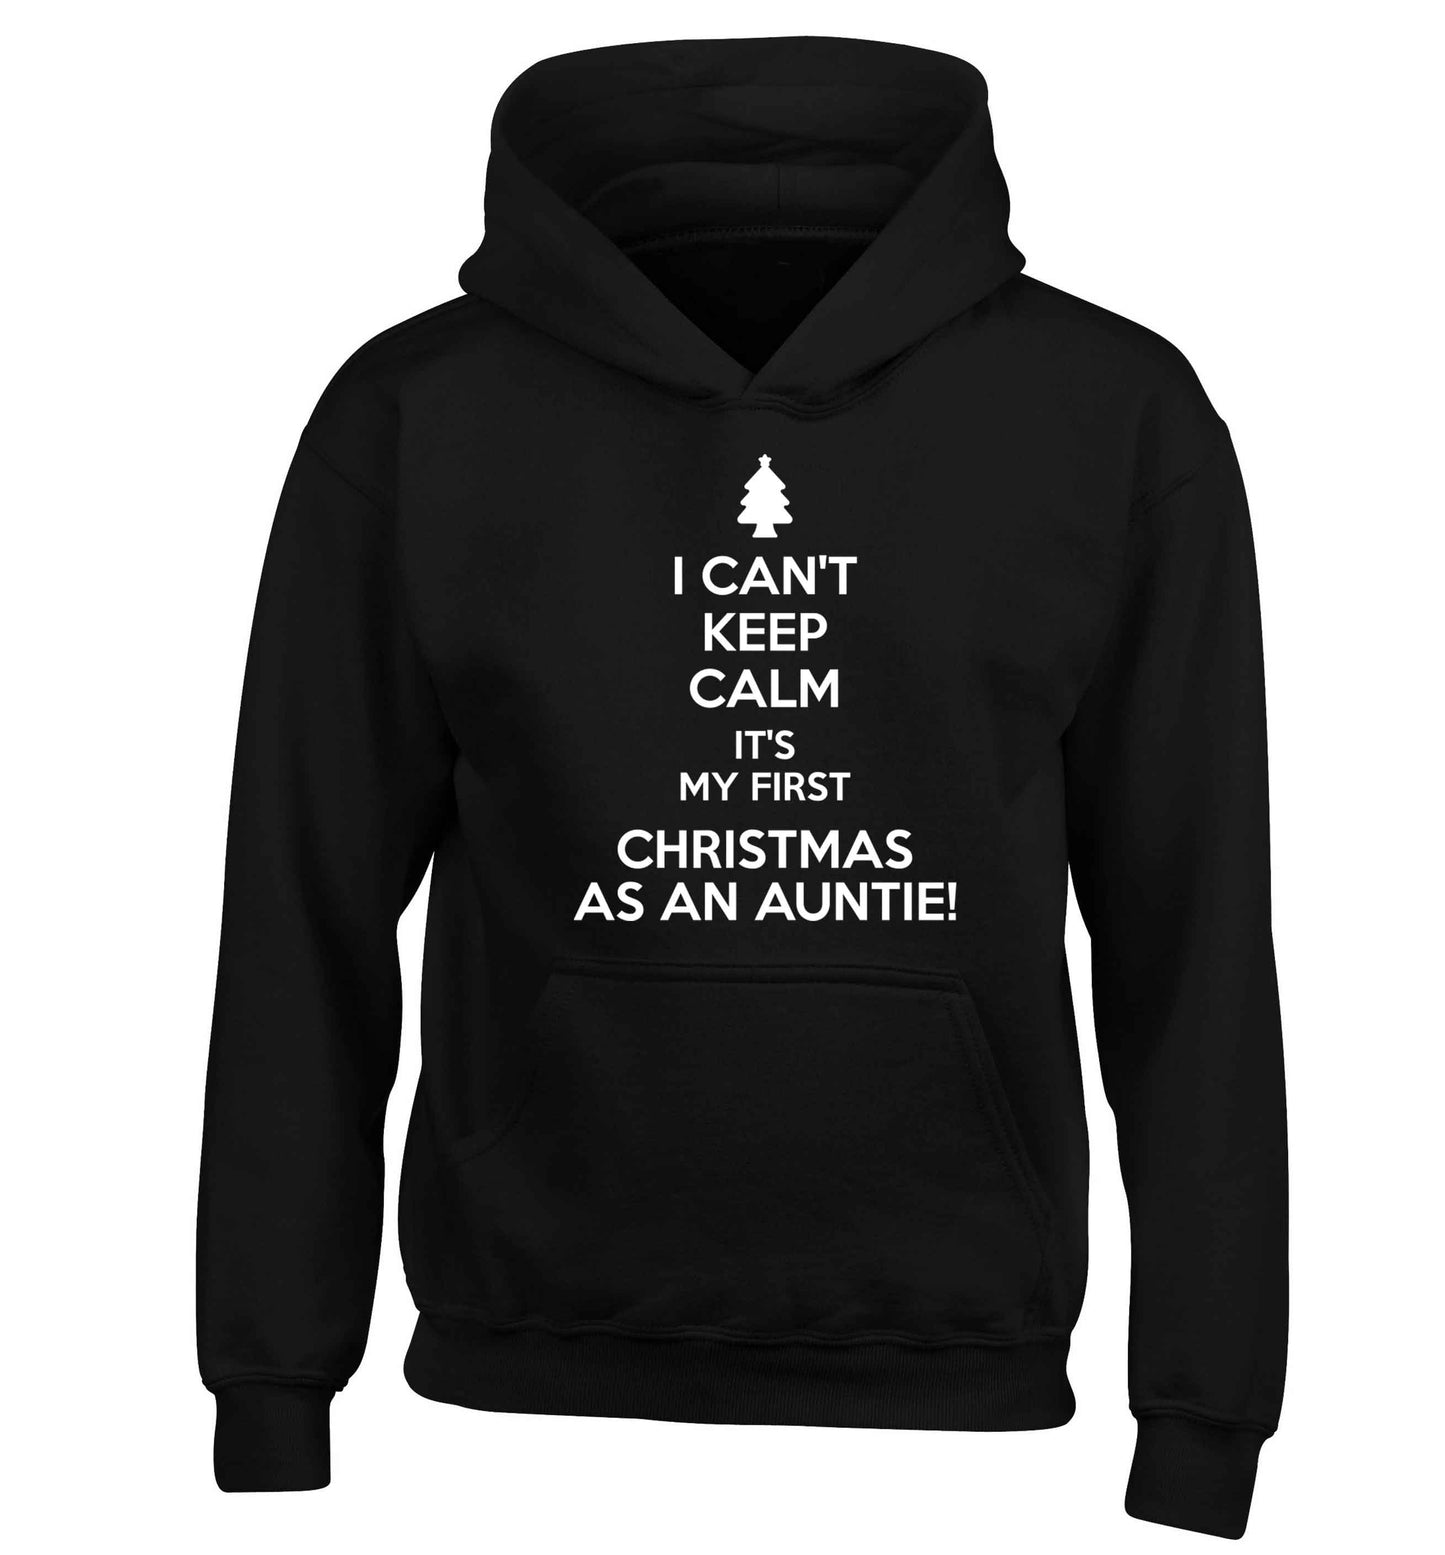 I can't keep calm it's my first Christmas as an auntie! children's black hoodie 12-13 Years